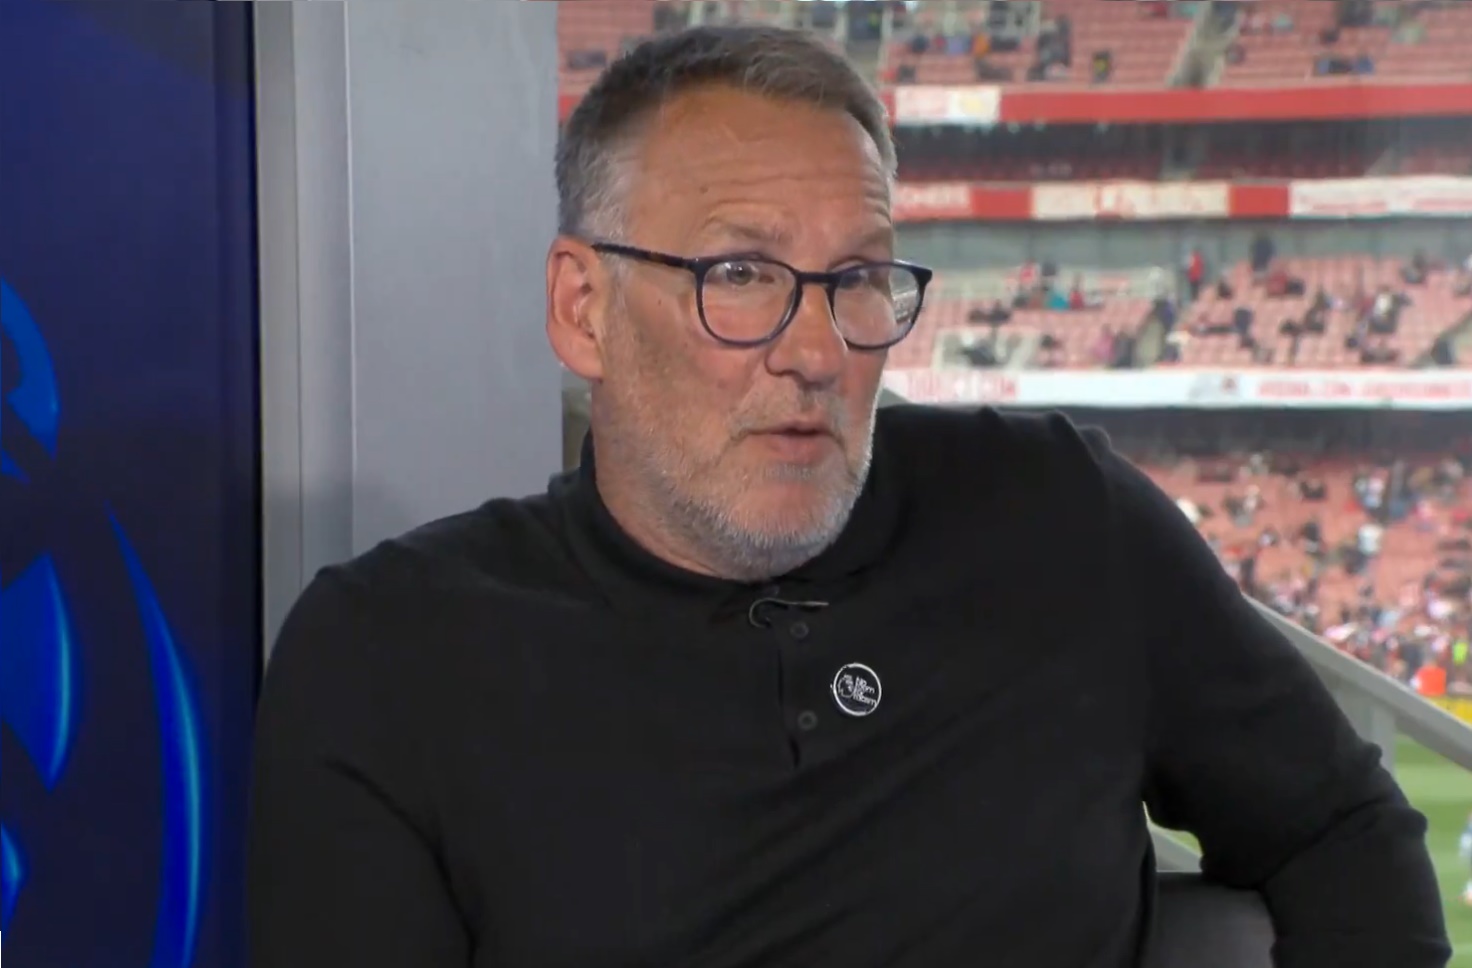 (Video) ‘They haven’t got…’ – Merson makes peculiar Liverpool claim despite costly defeat v Palace